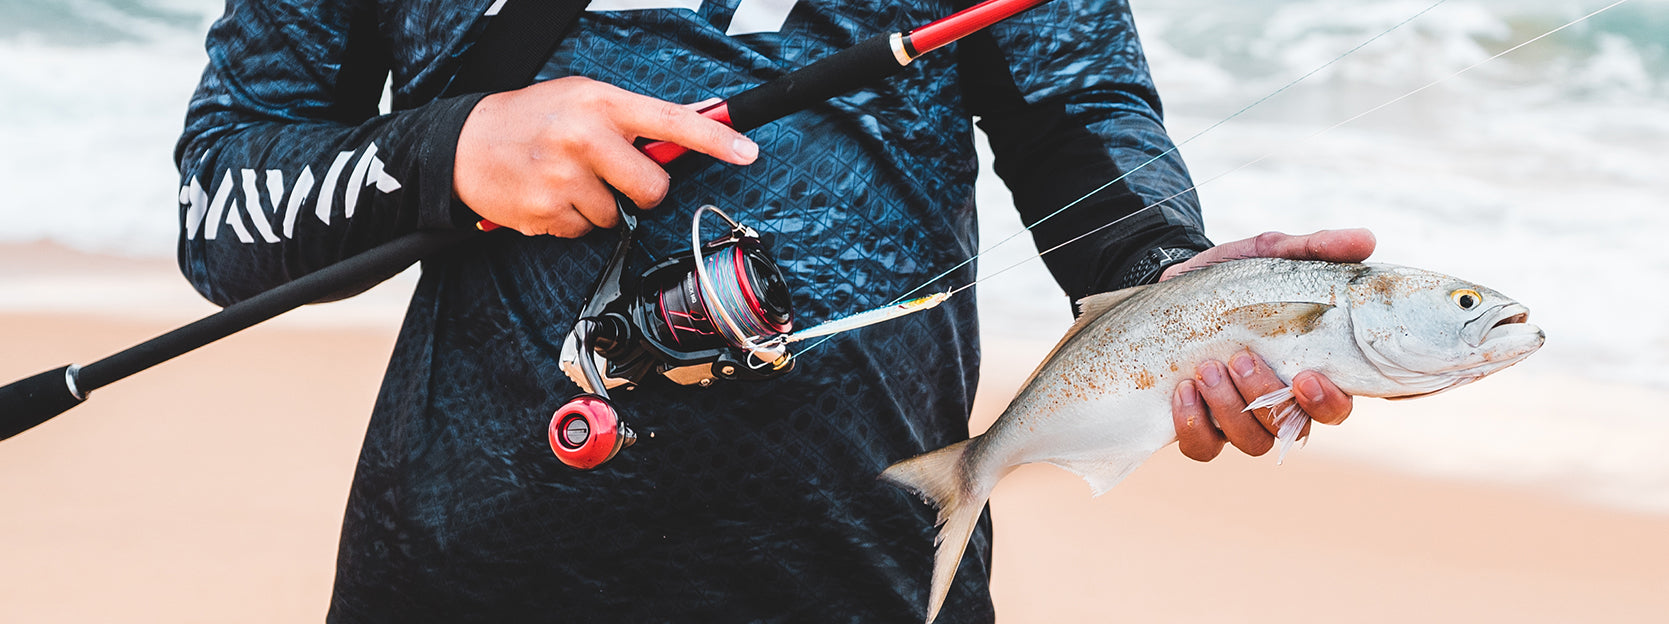 Ultimate Guide on Where and When to Catch Any Type of Fish in